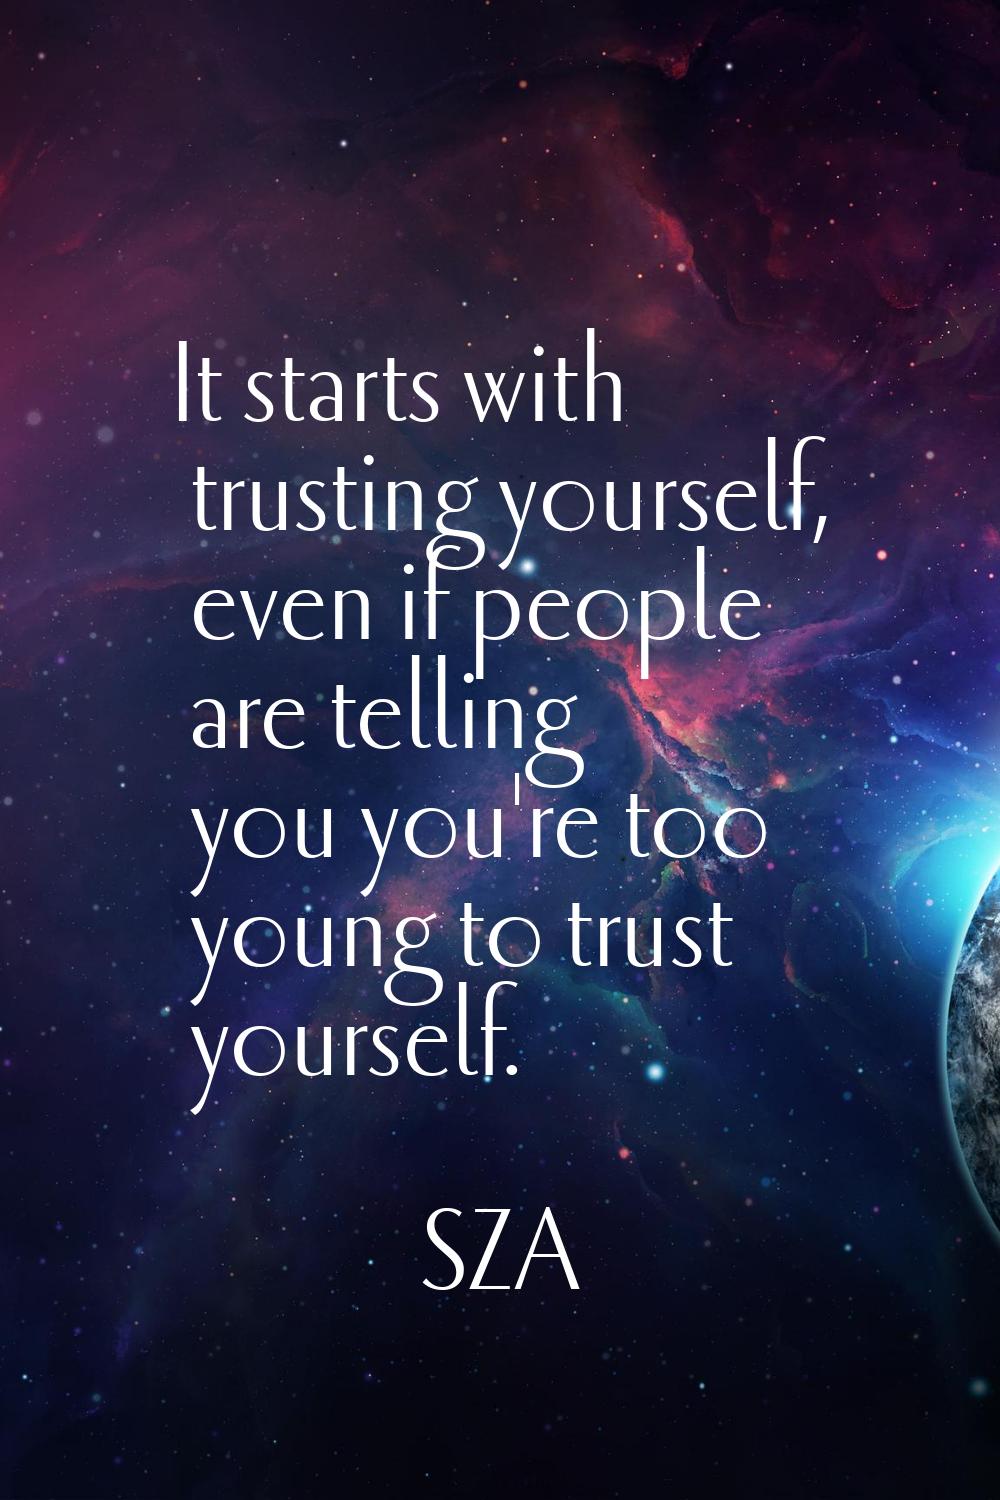 It starts with trusting yourself, even if people are telling you you're too young to trust yourself